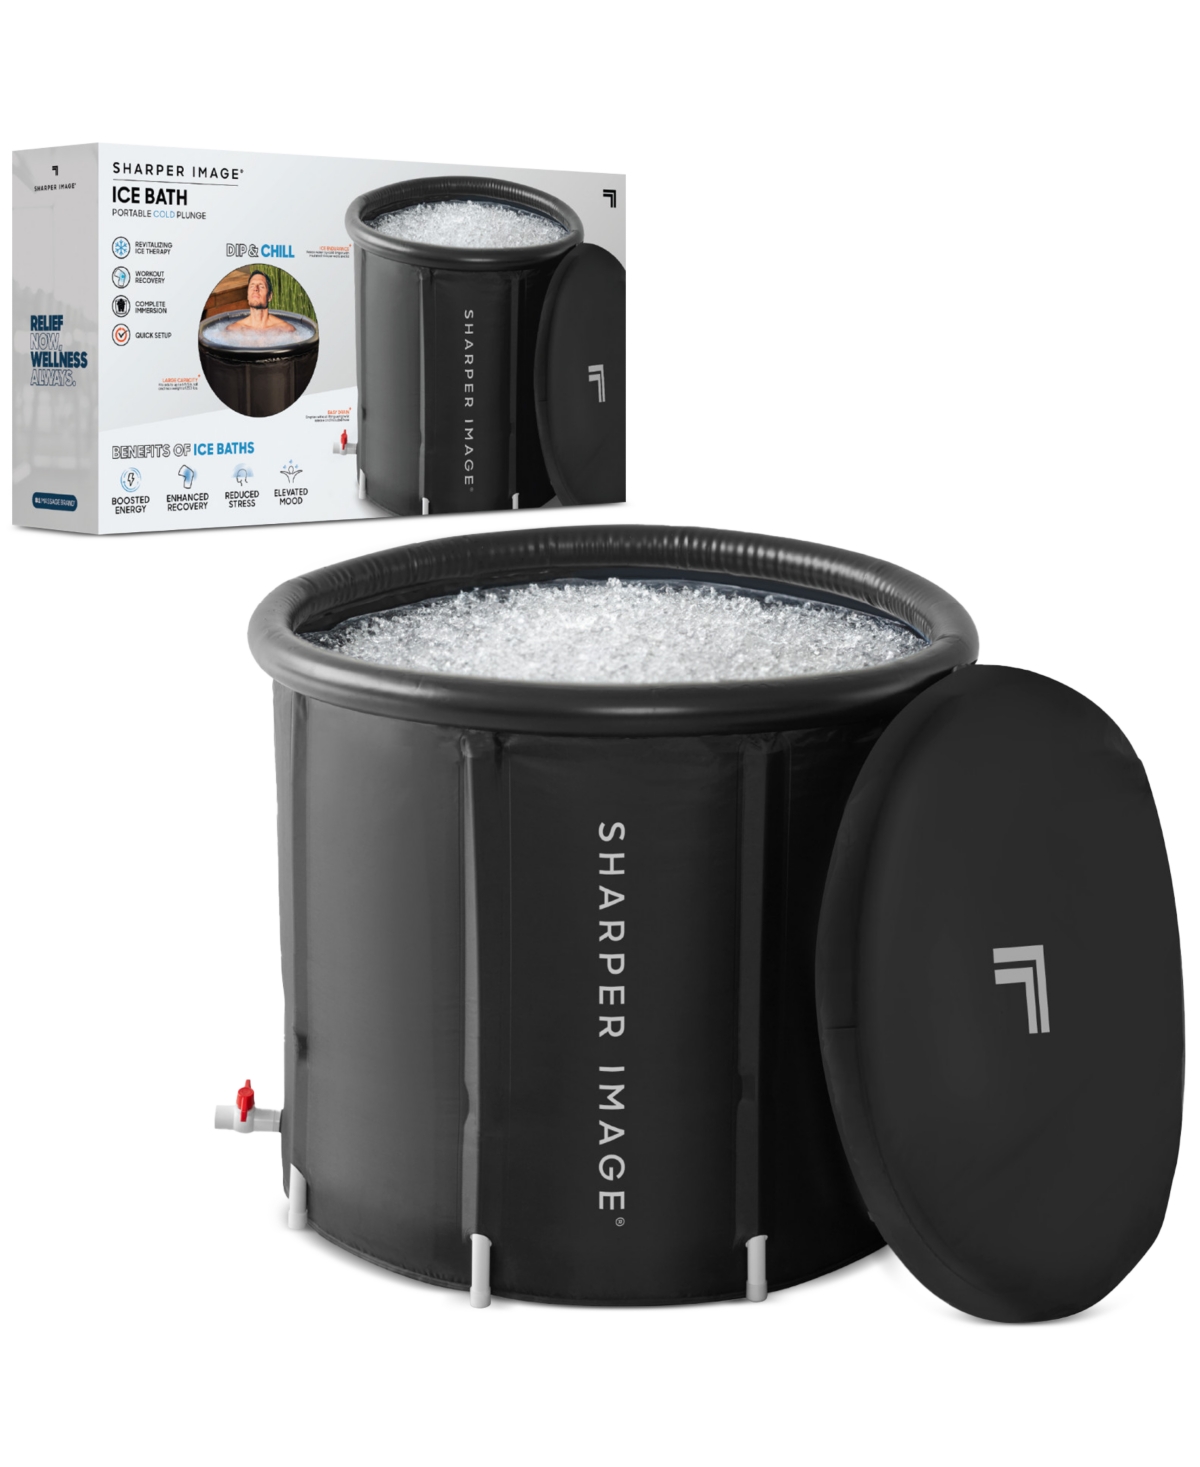 Sharper Image Ice Bath Portable Cold Plunge Revitalizing Ice Therapy In White